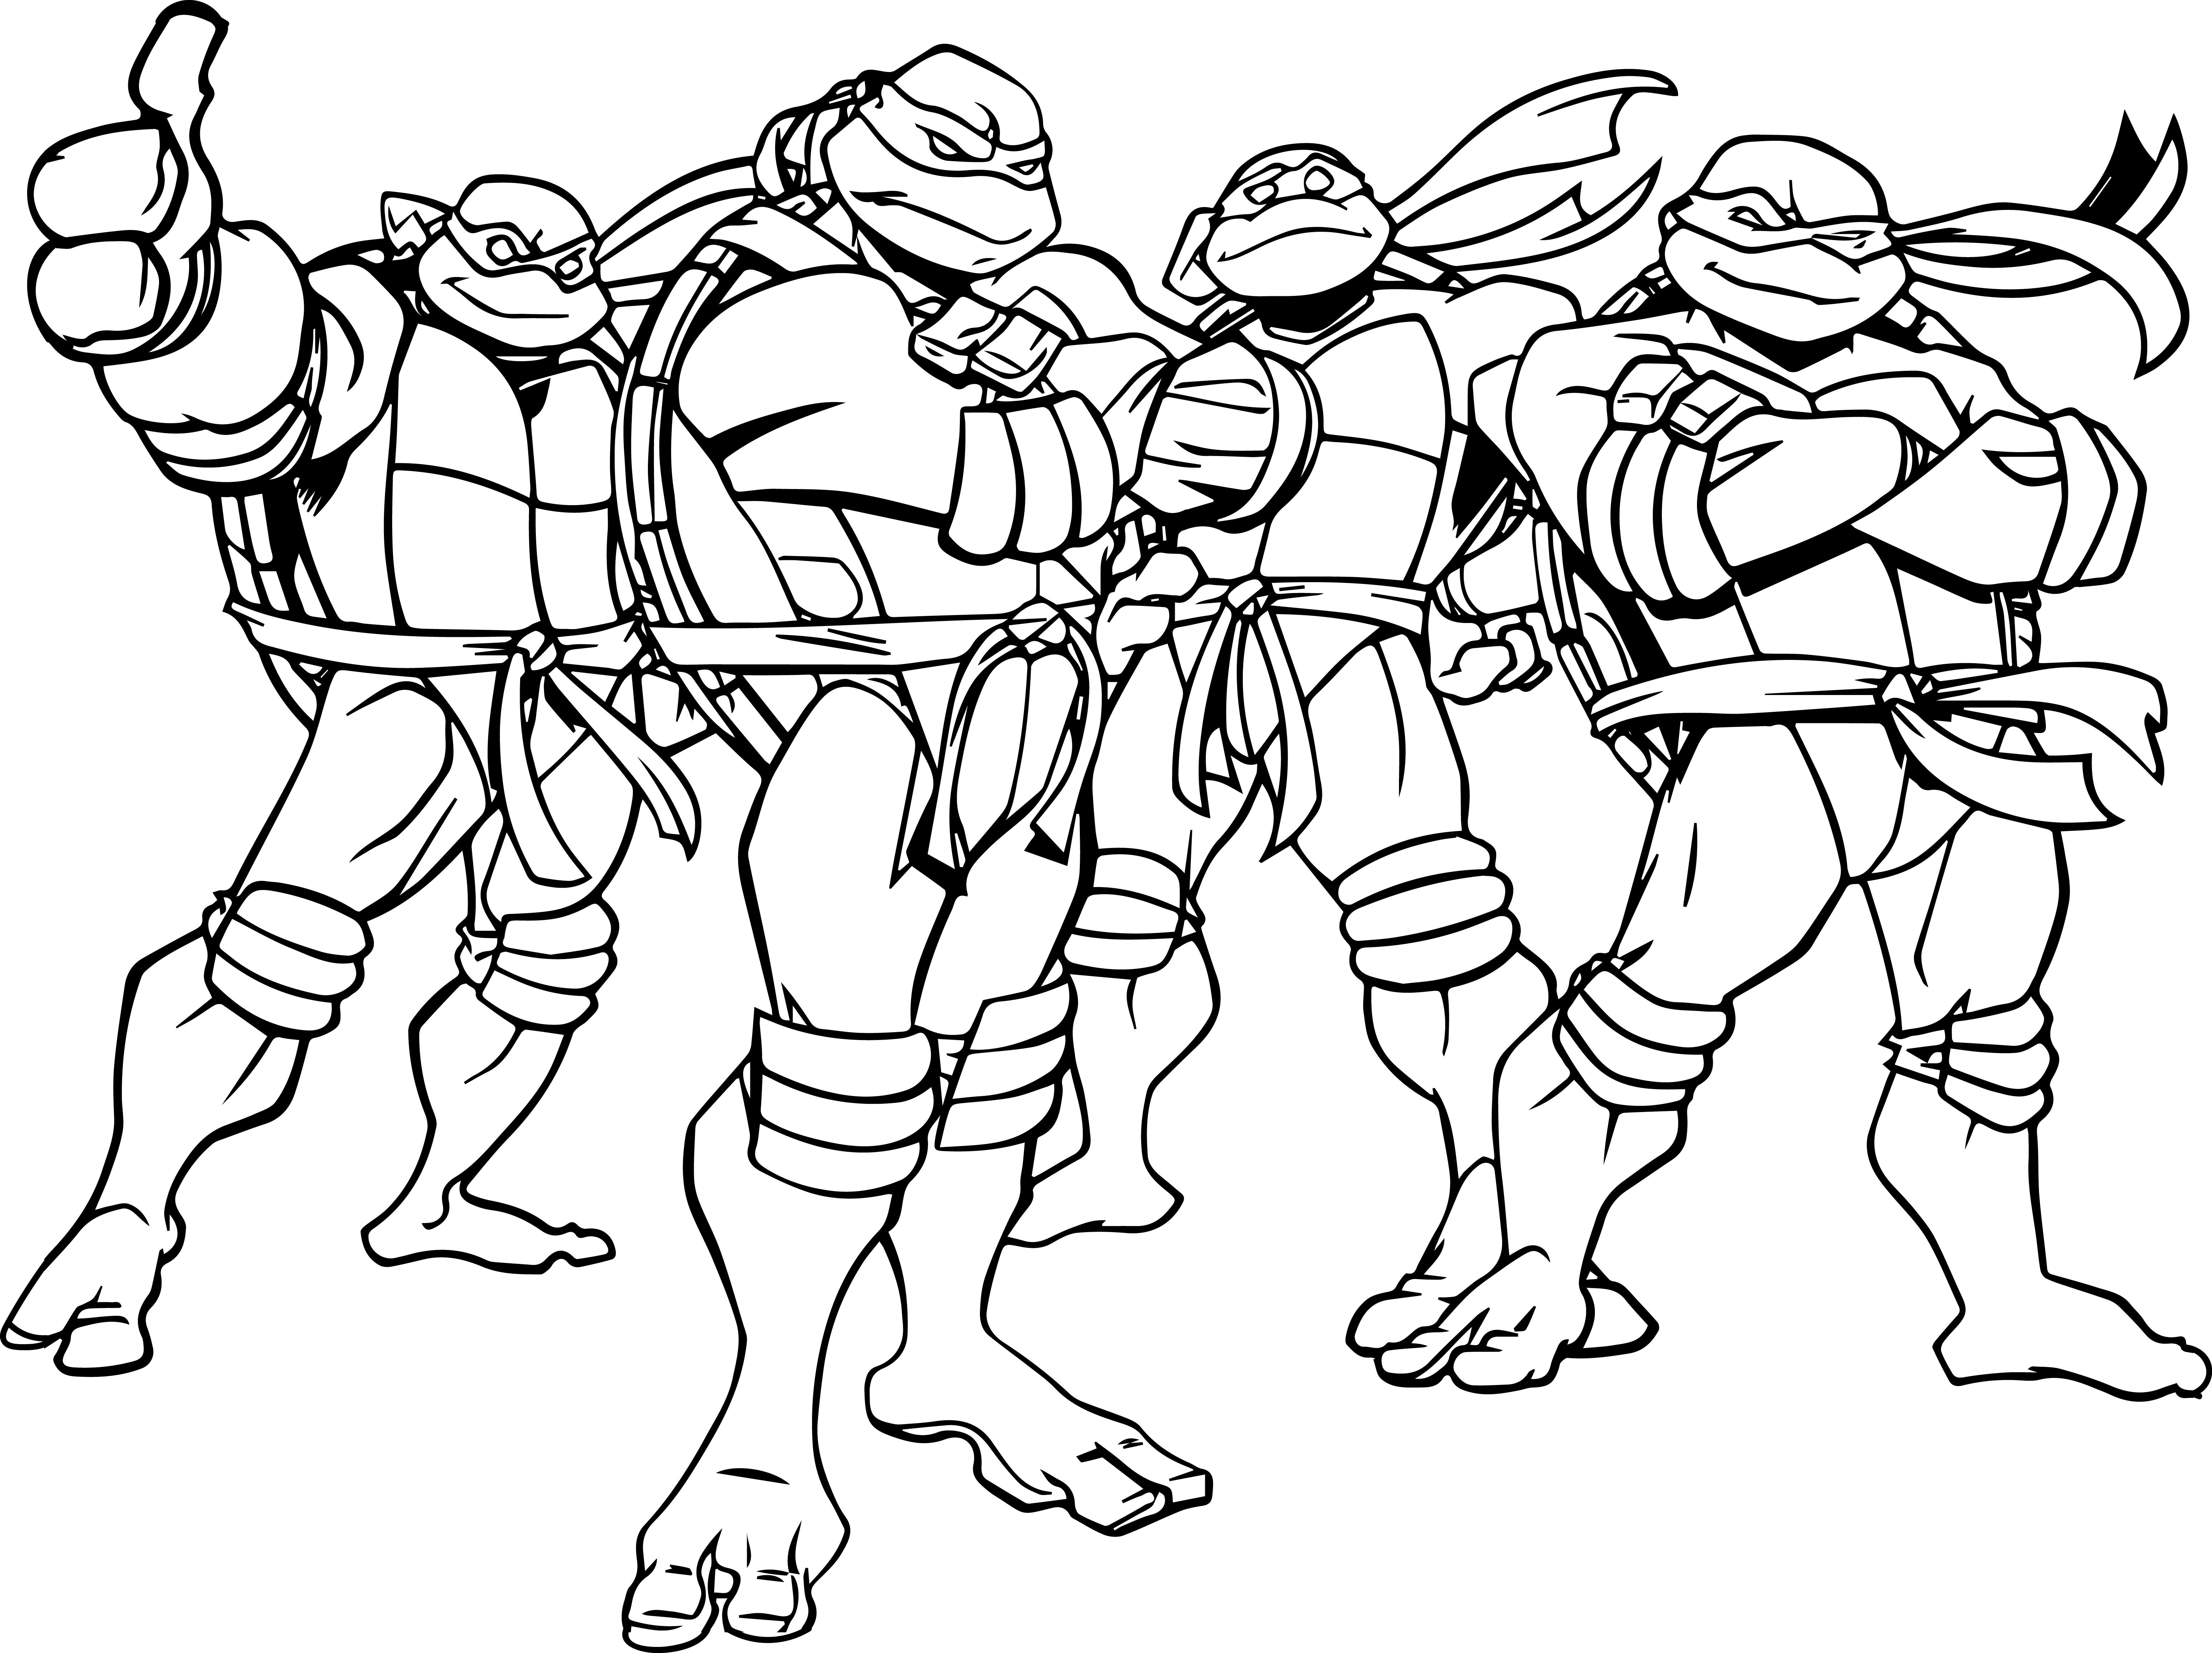 Ninja Turtle Coloring Pages Pdf at GetColoringscom Free